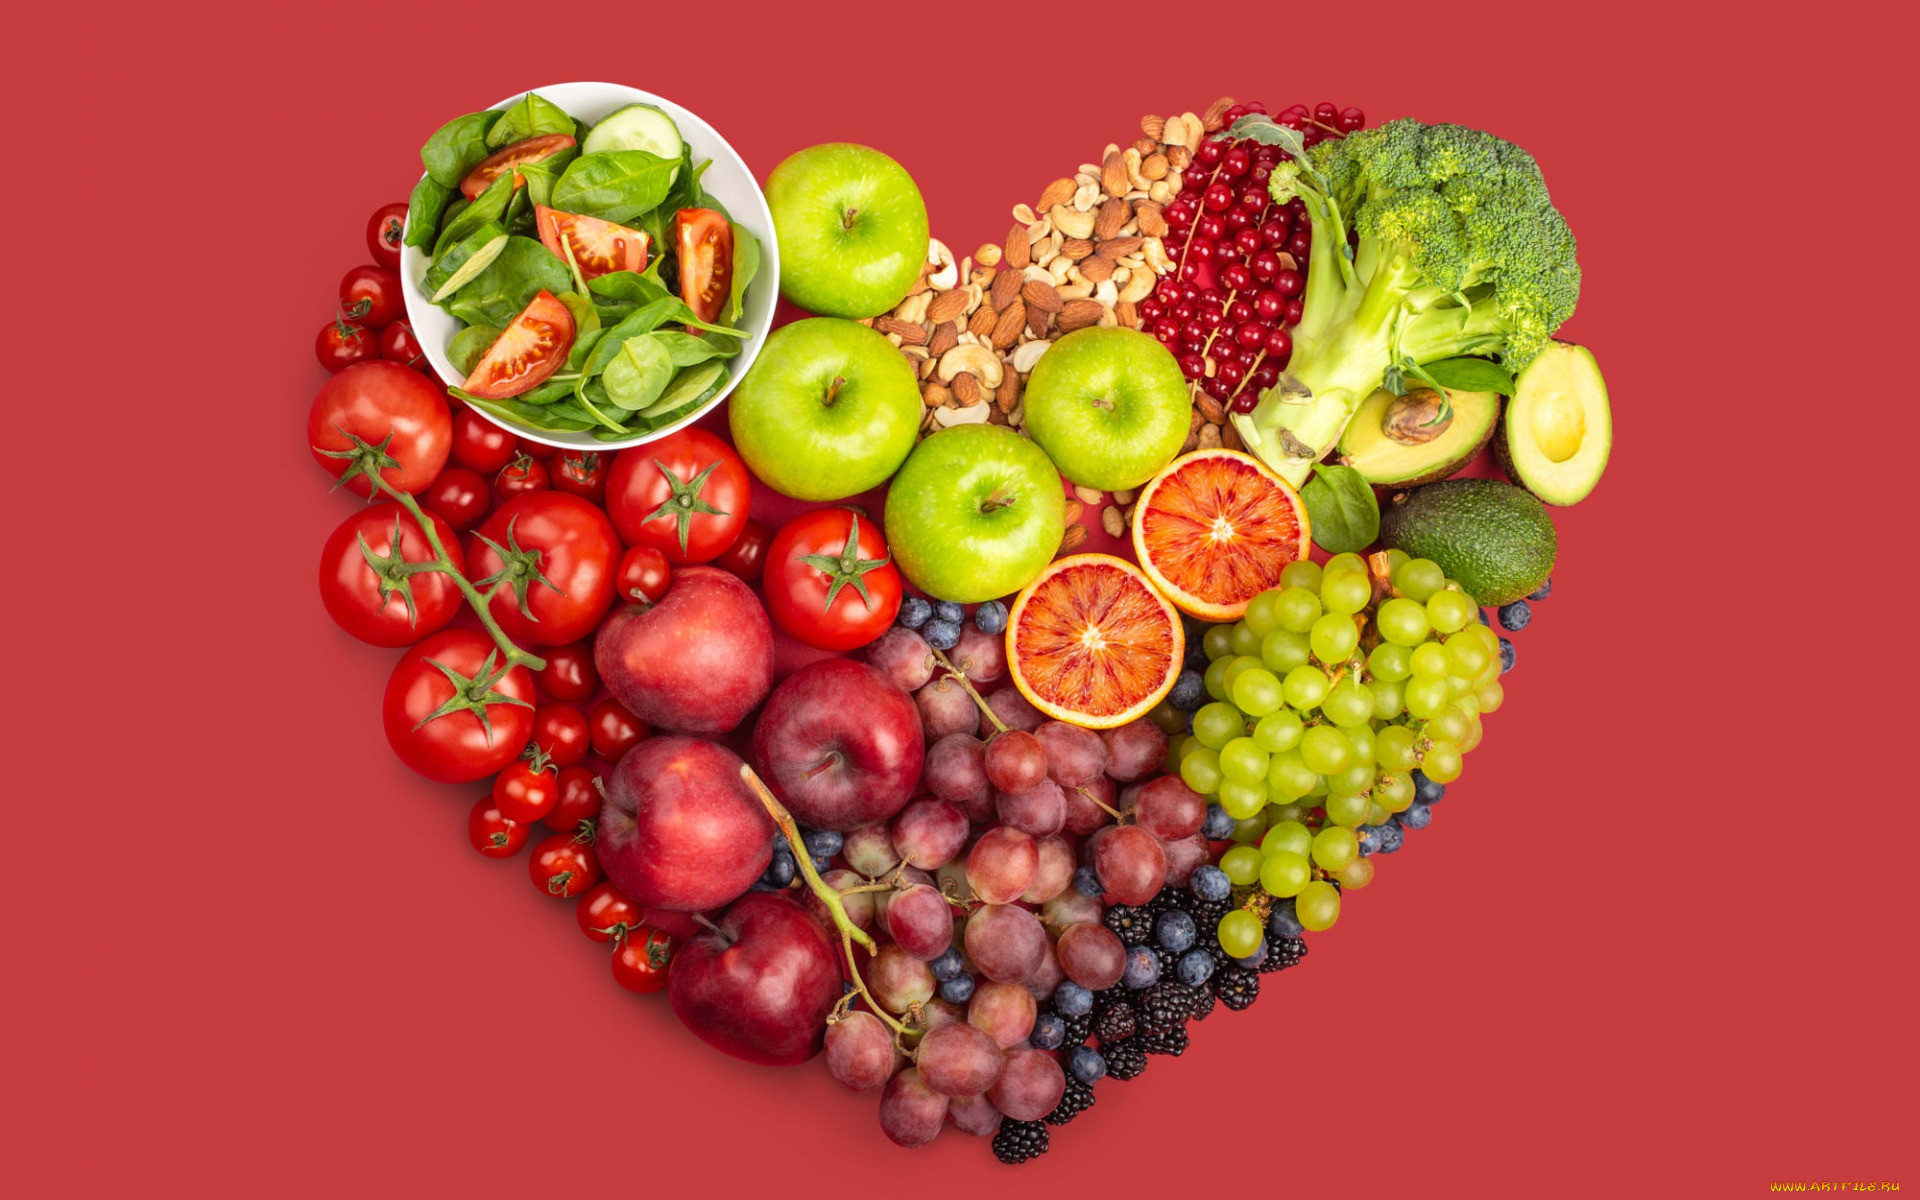 Red Background Simple Background Food Fruit Vegetables Berries Salad Tomatoes Grapes Apples Heart De 1920x1200